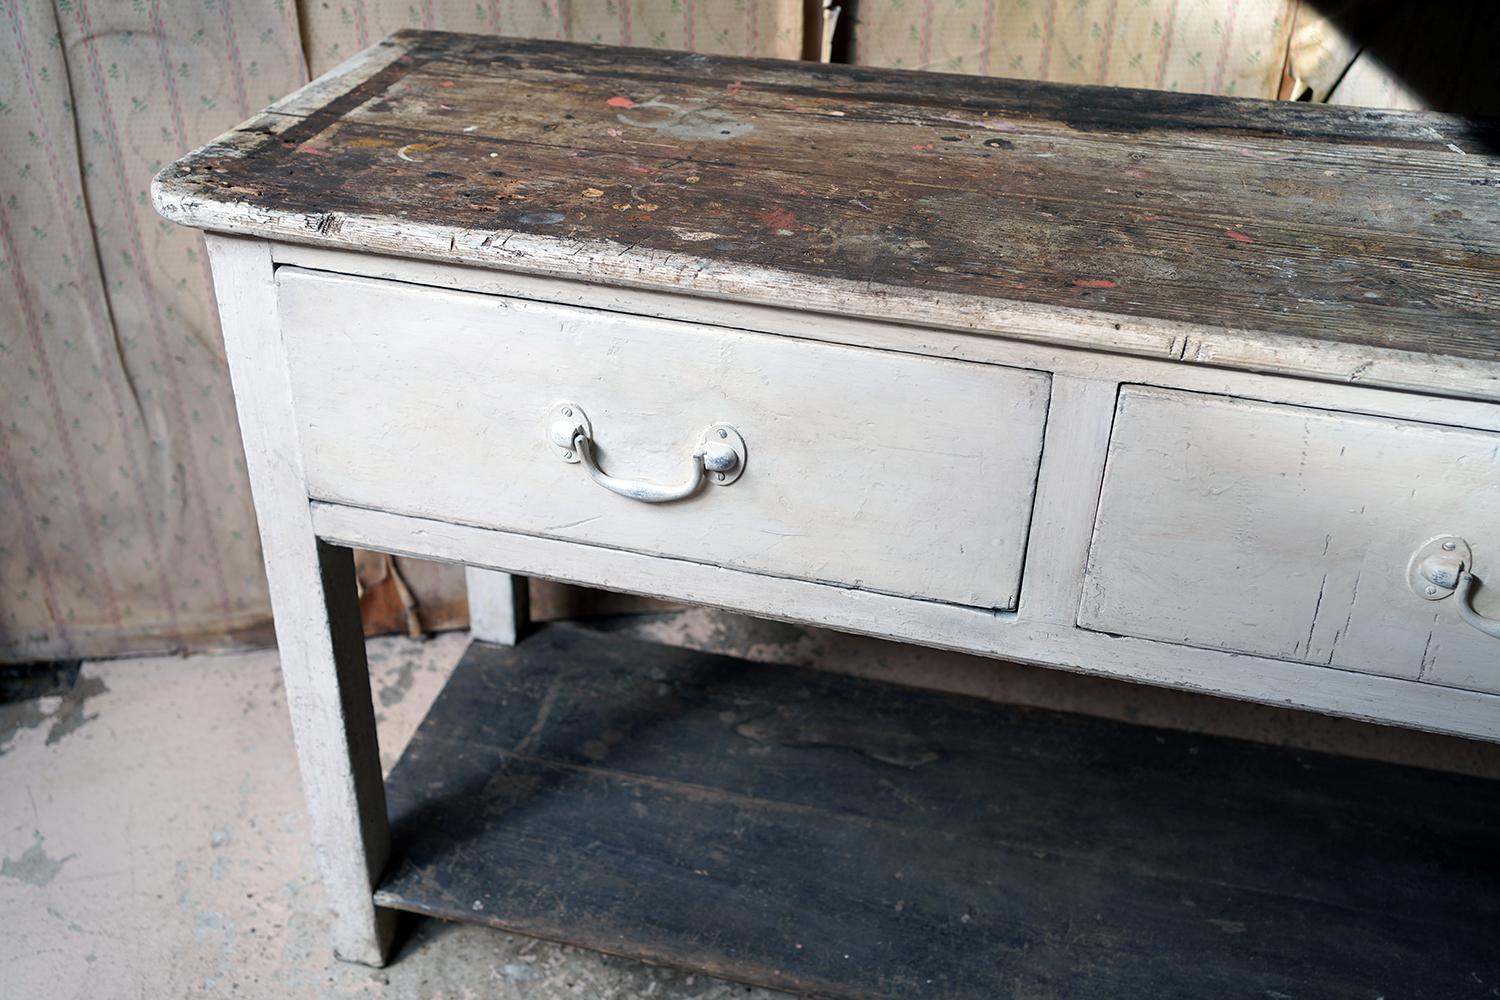 The good thick deal pine dresser base, showing a white paint distressed commensurate with age, having a characterful thick and well-worn top over three frieze drawers with drop handles, to a well-worn pot board, the whole standing on integral block